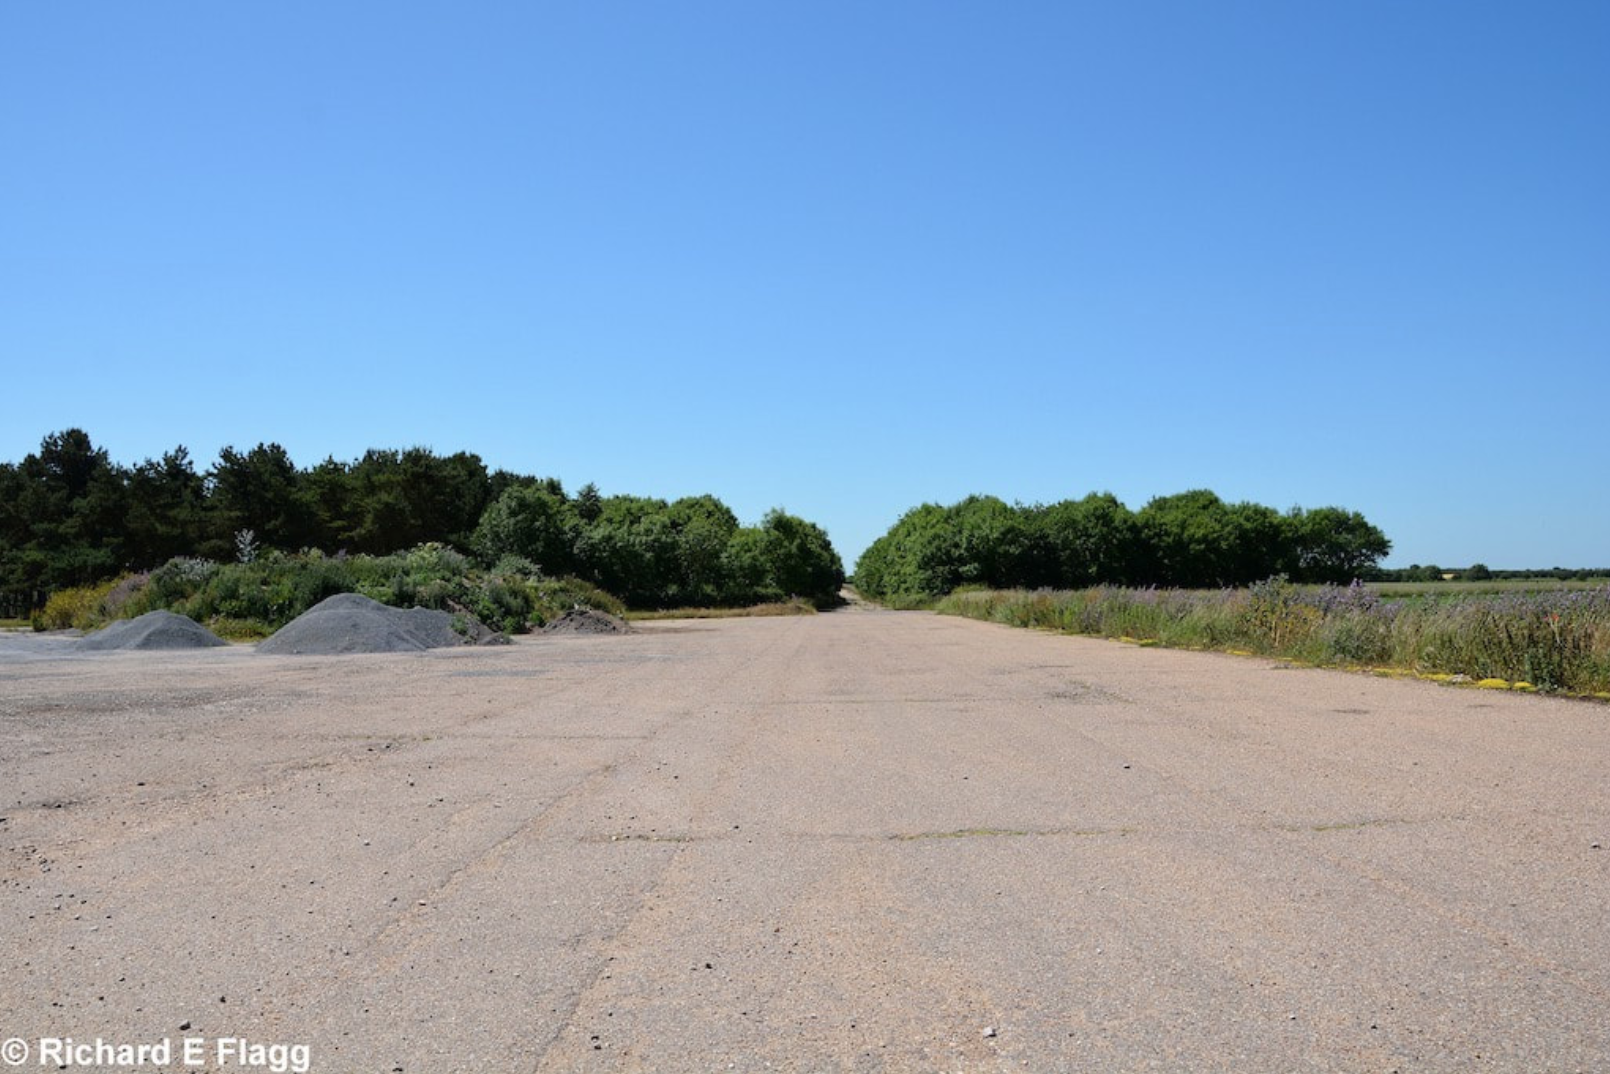 018Runway 07:25. Looking south west from the runway 02:20 intersection - 30 June 2015.png